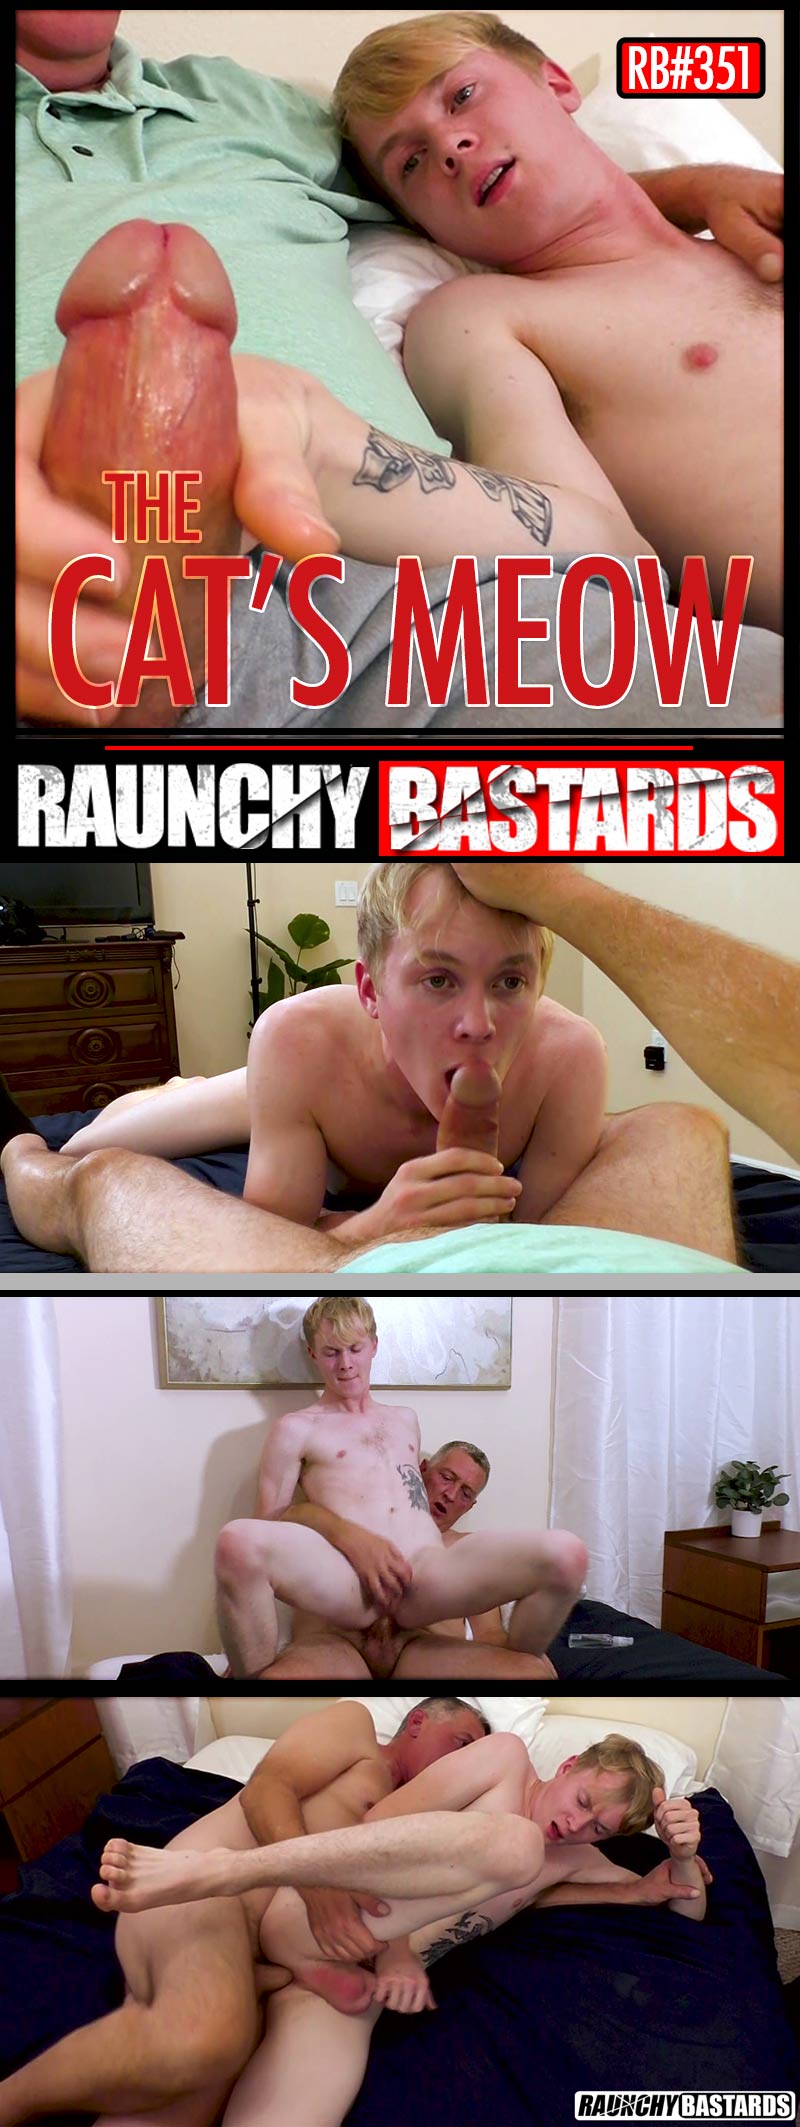 Episode #351: Clay Fucks Dallas Ari in 'The Cat's Meow' at Raunch Bastards